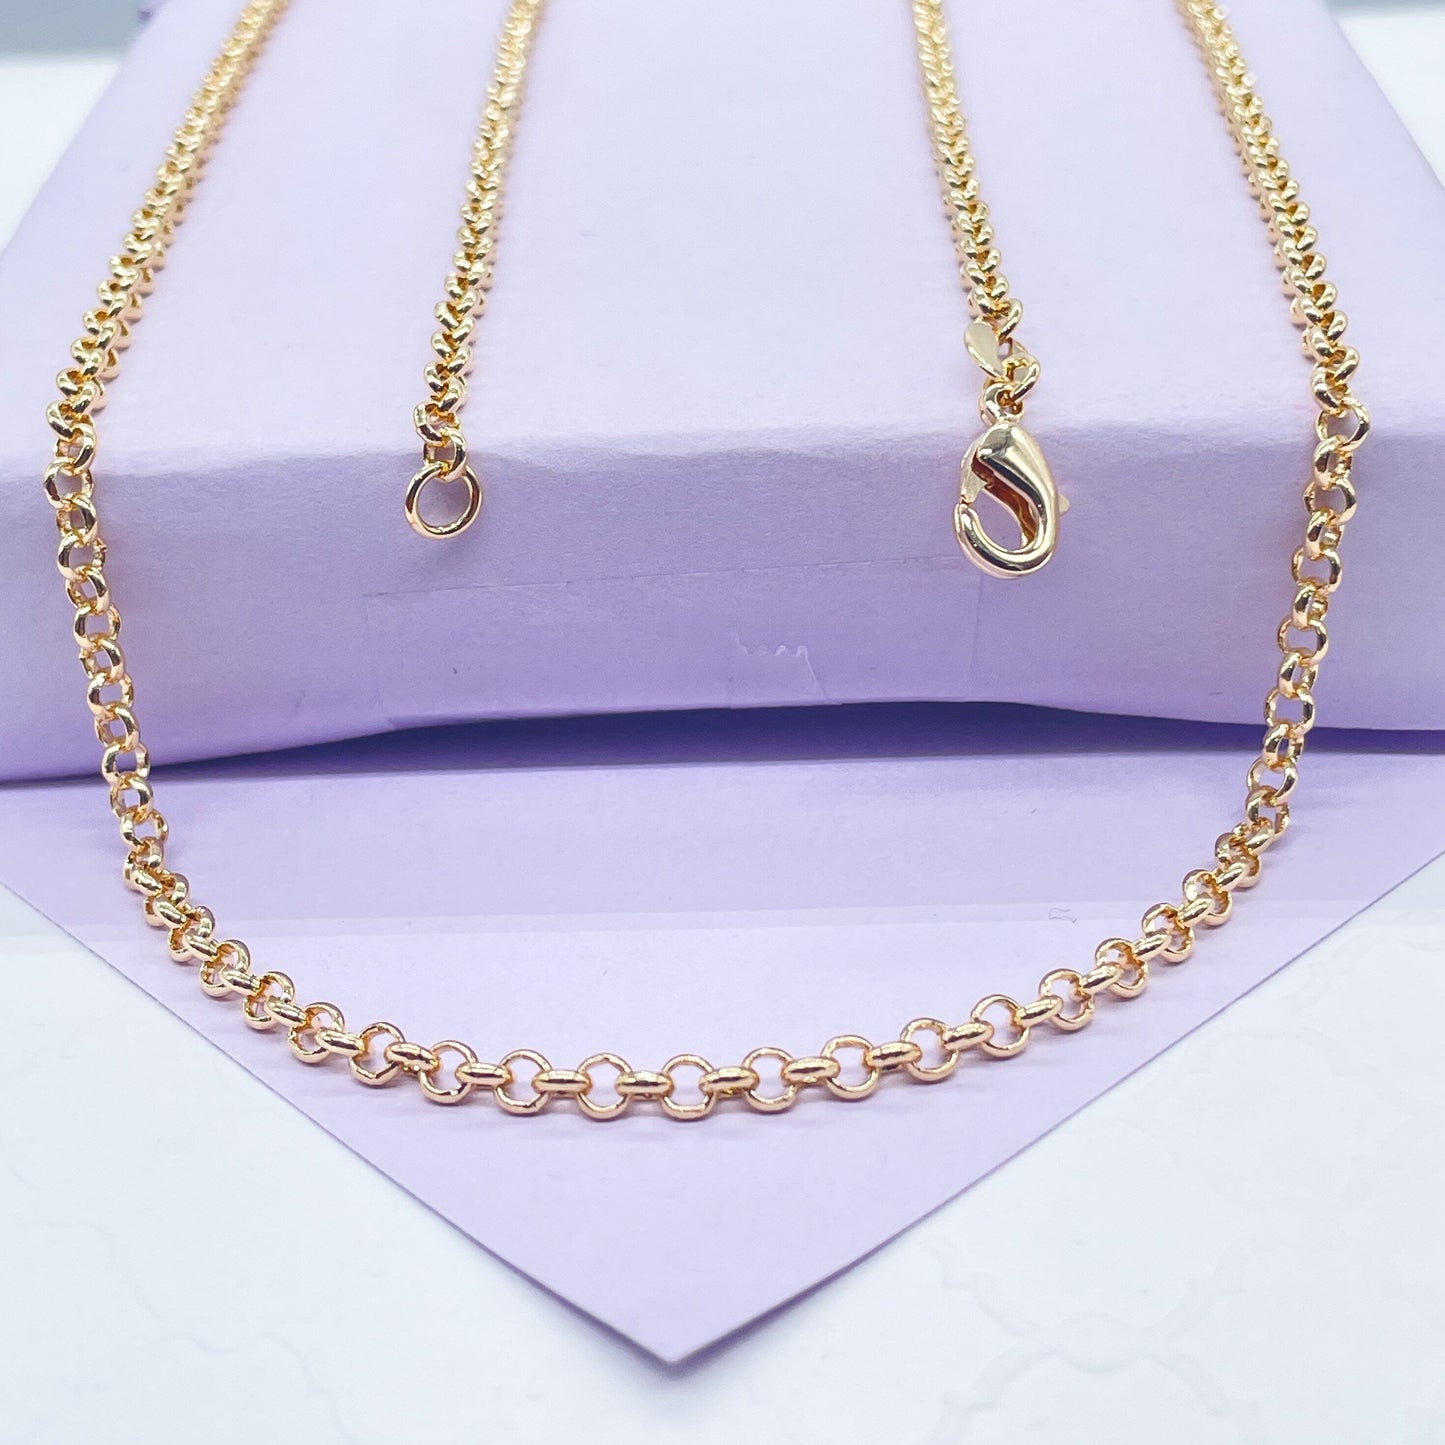 18k Gold Filled Plain 3mm Rolo Chain, Available in 3 Sizes